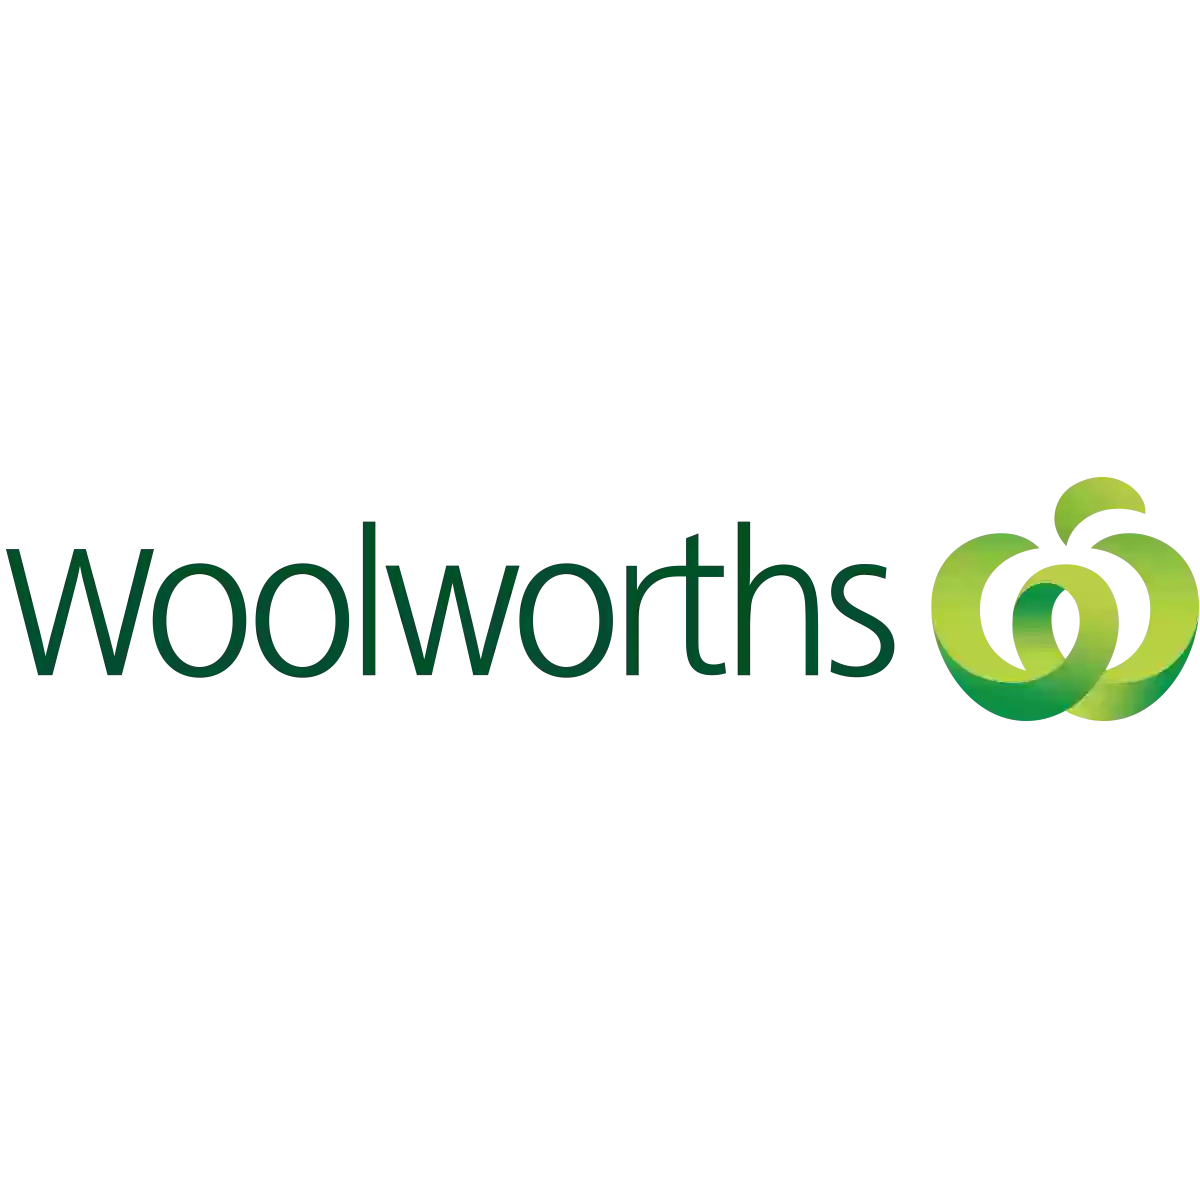 Woolworths Crows Nest